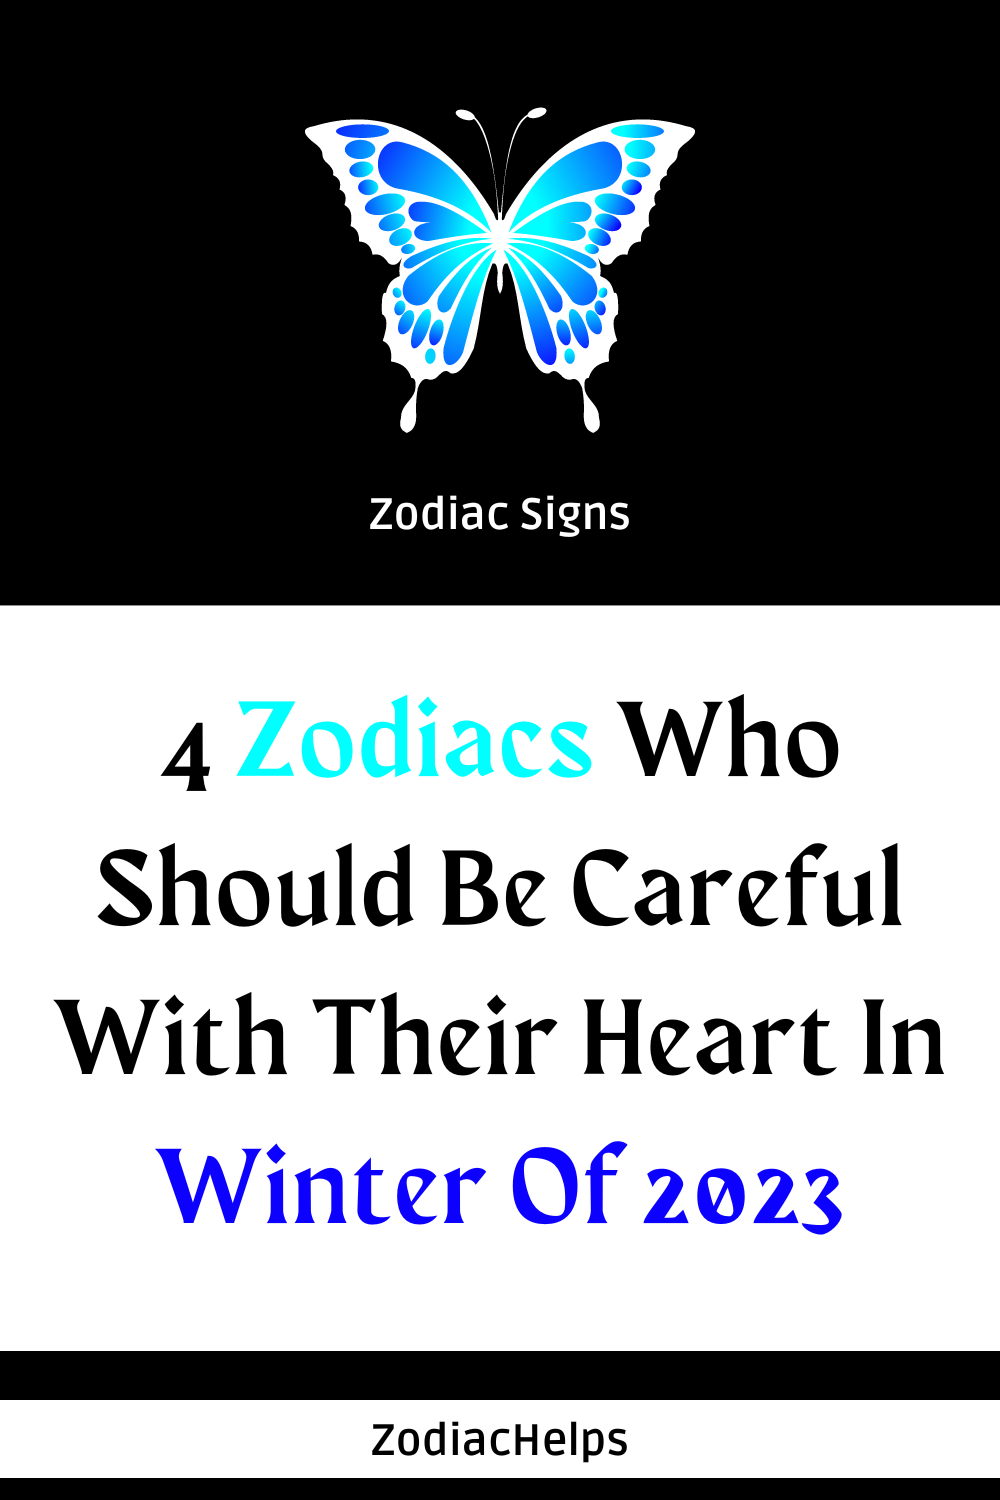 4 Zodiacs Who Should Be Careful With Their Heart In Winter Of 2023